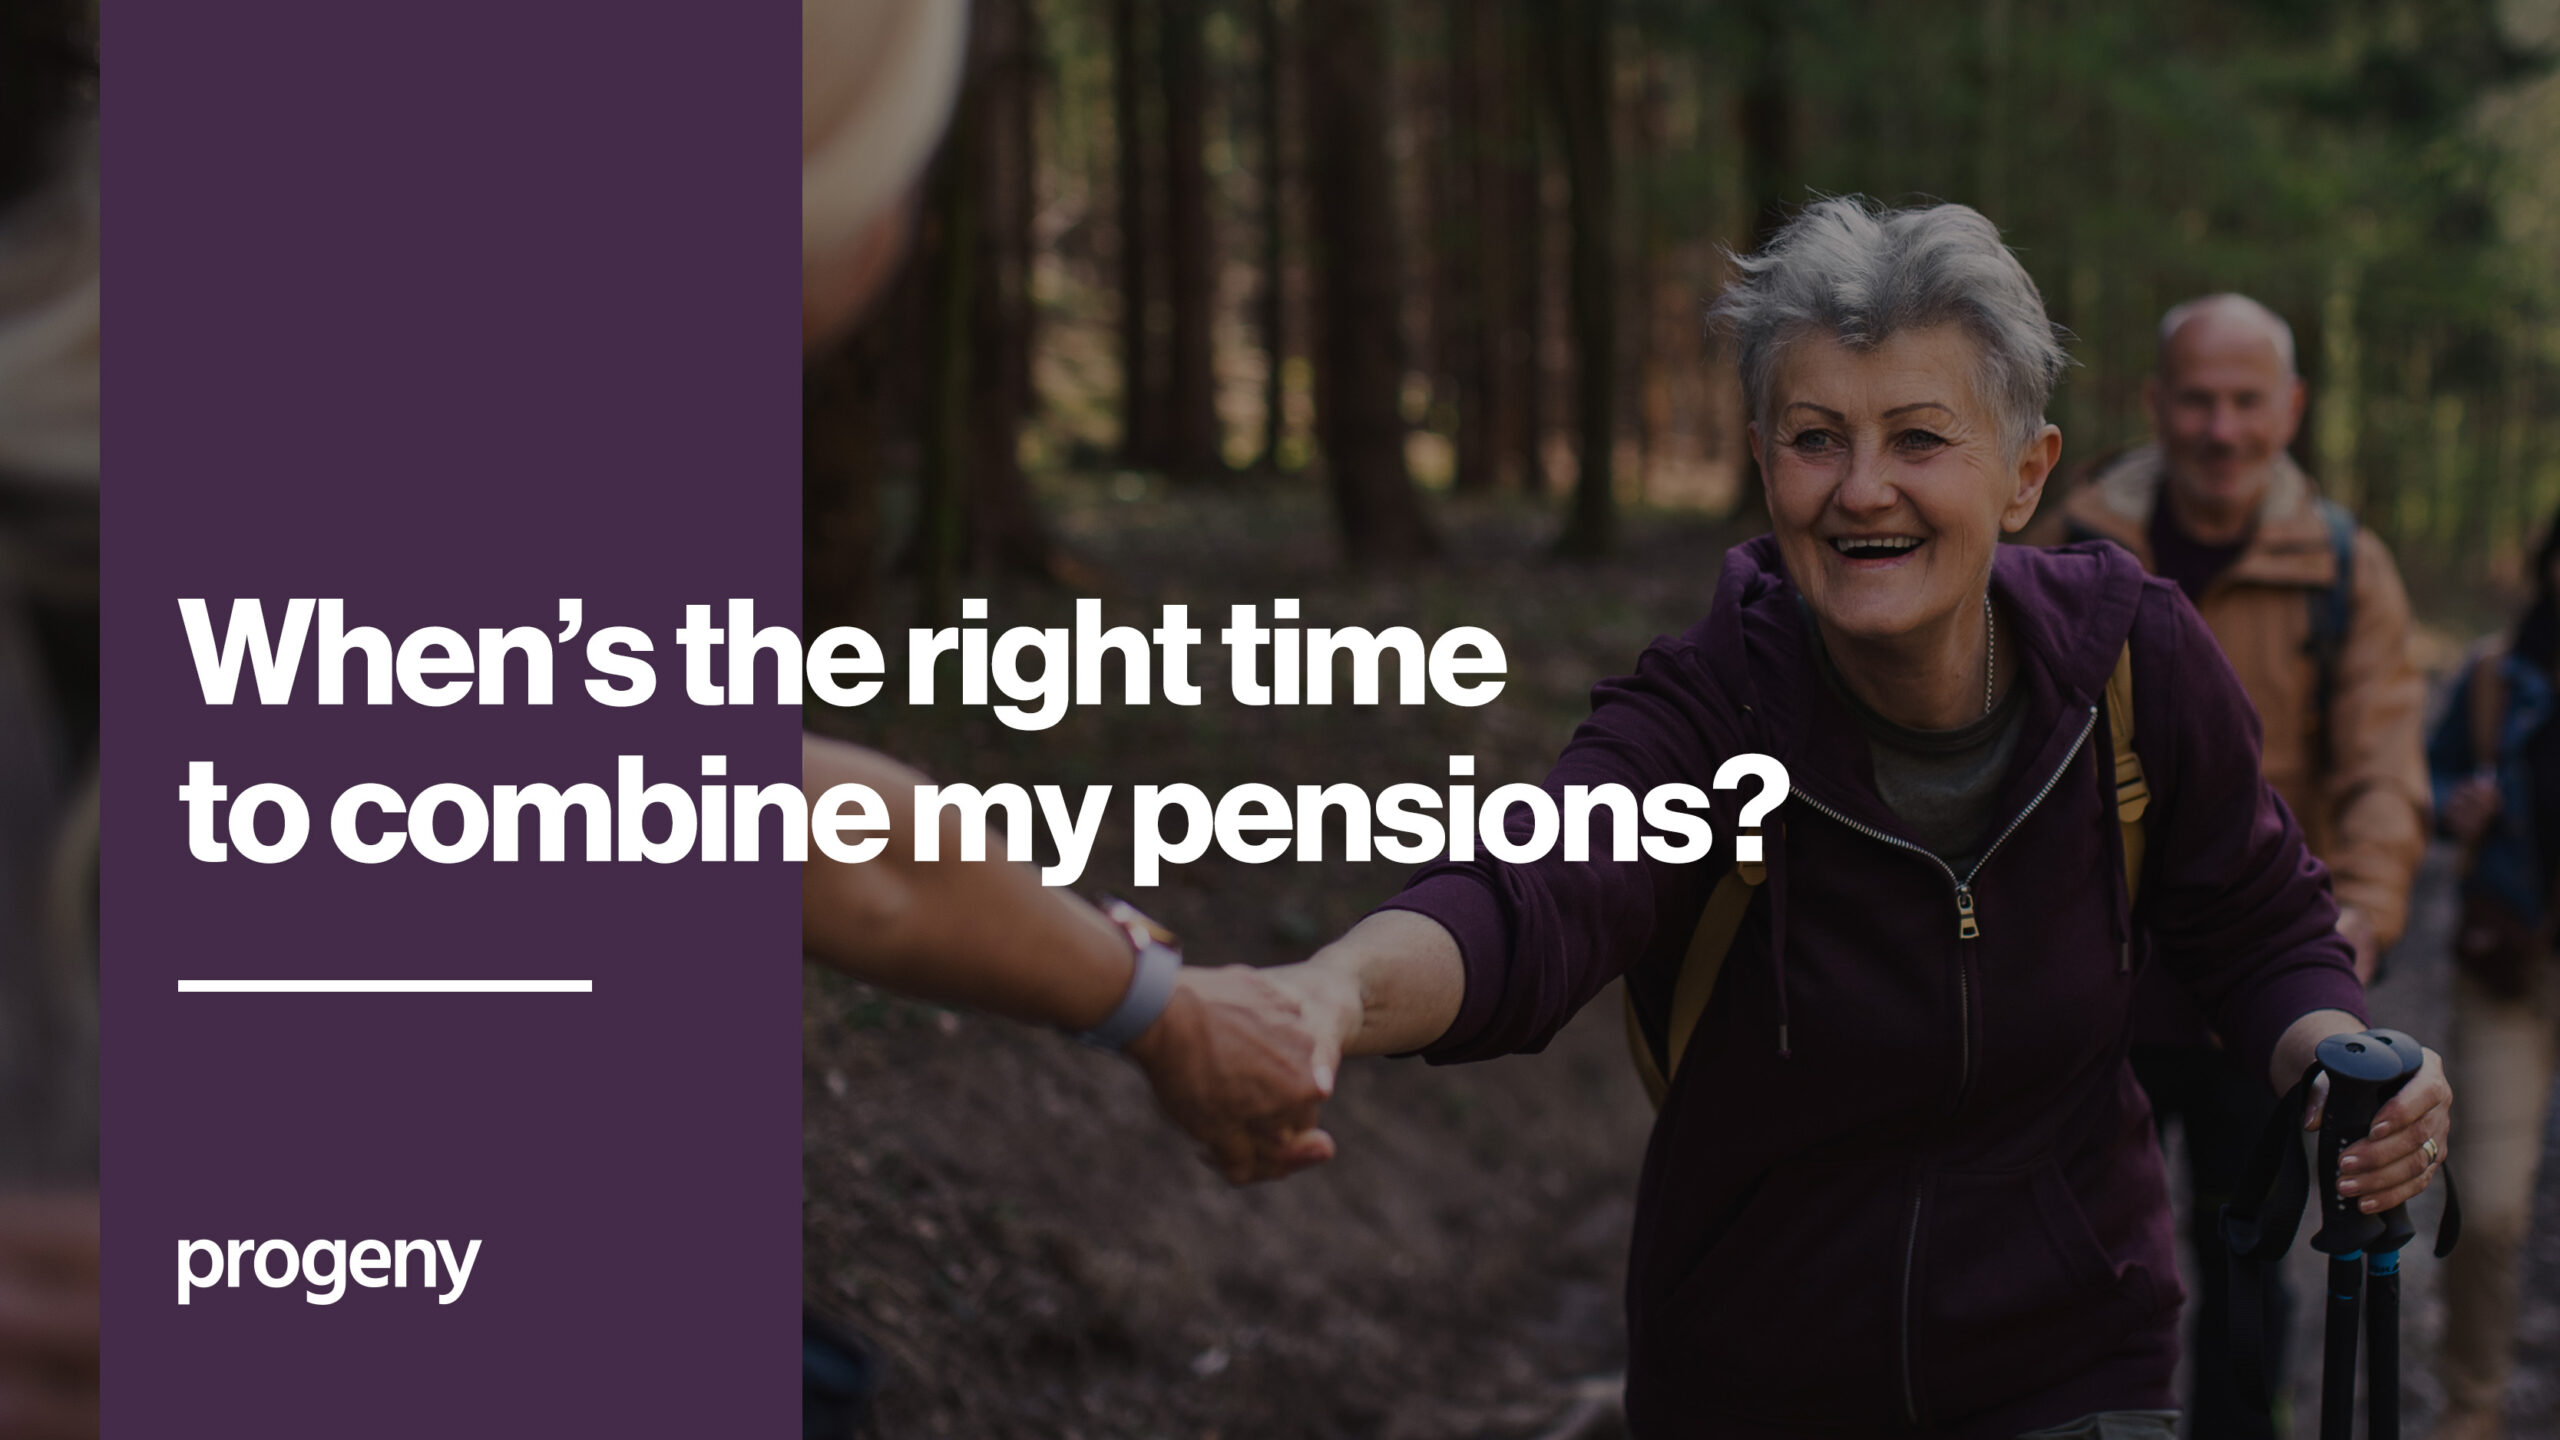 When’s the right time to combine my pensions